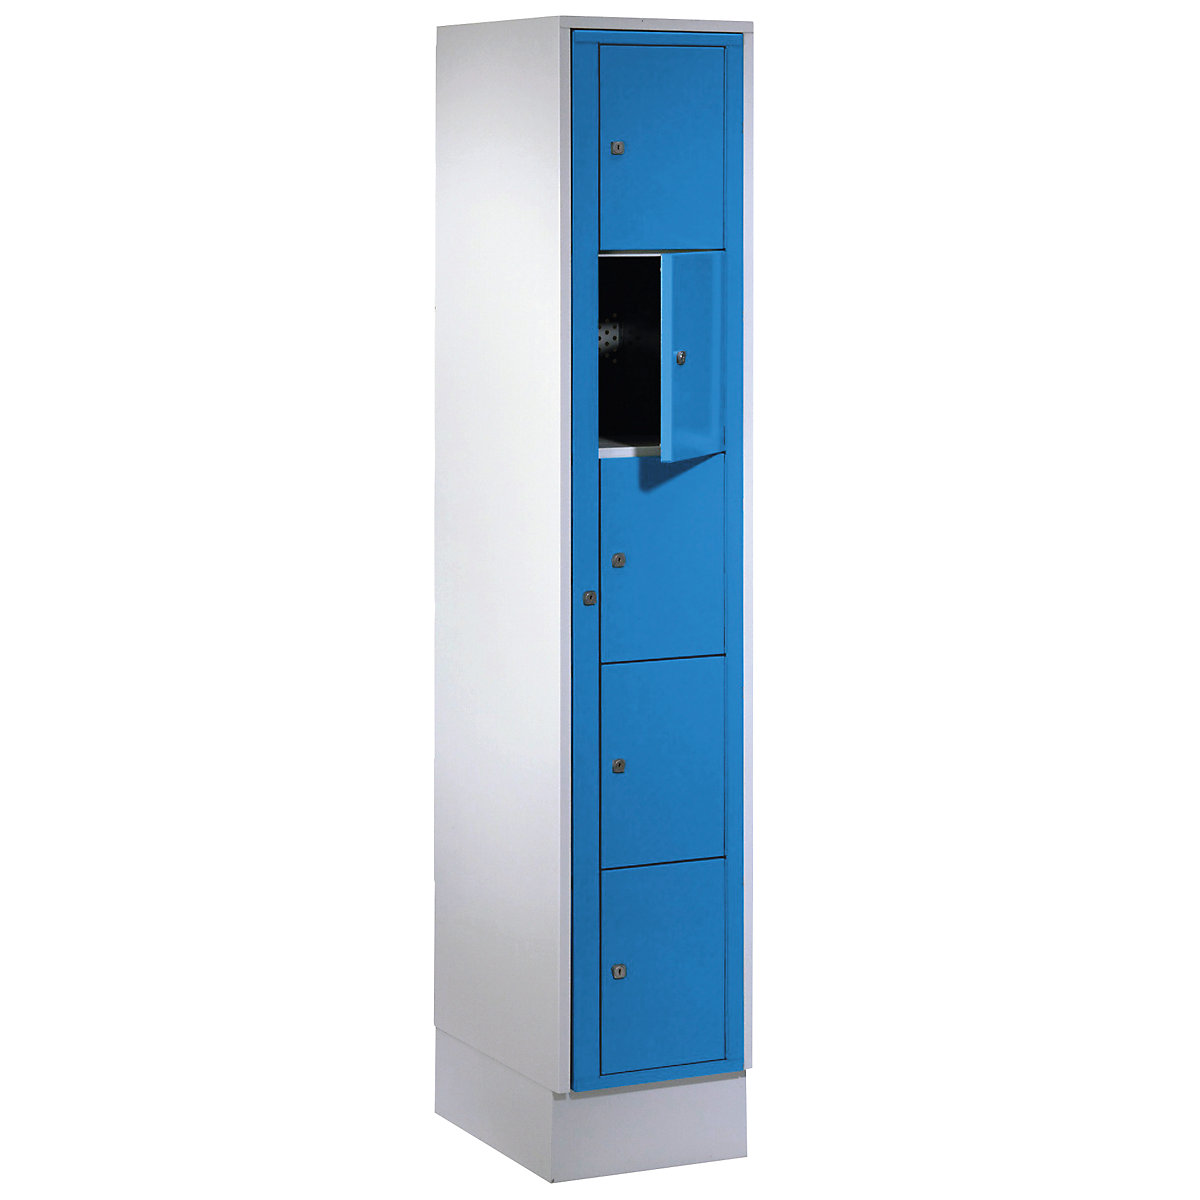 Laundry cabinet – Wolf, HxWxD 1800 x 350 x 500 mm, 5 compartments, light grey / light blue-1